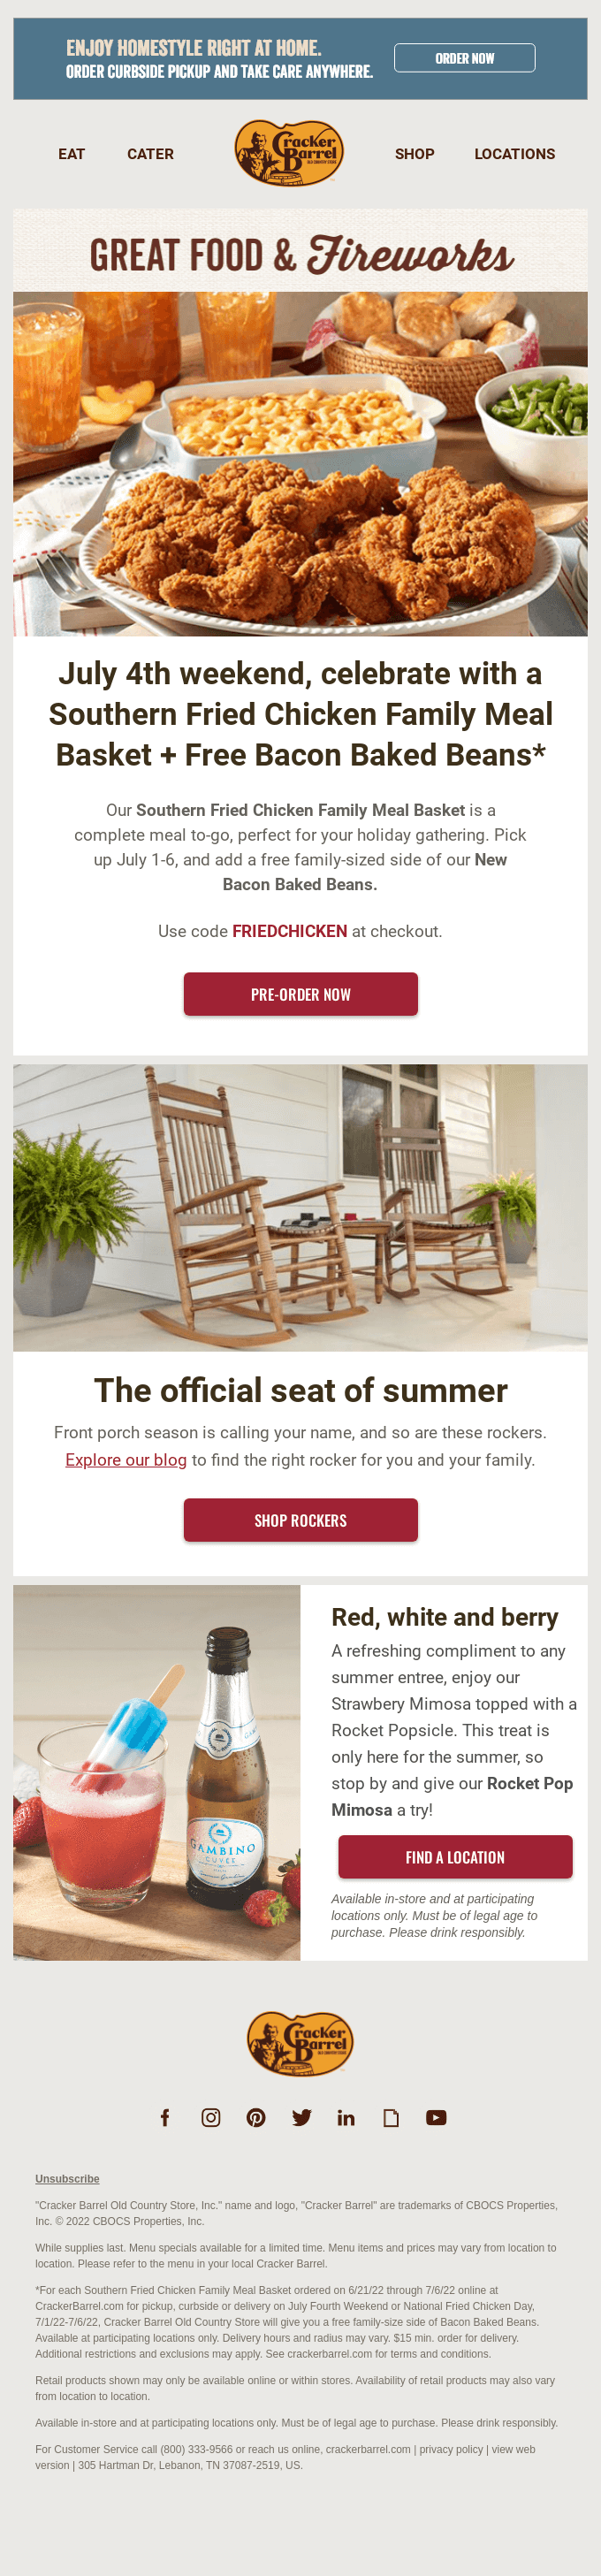 An email blast from Cracker Barrel